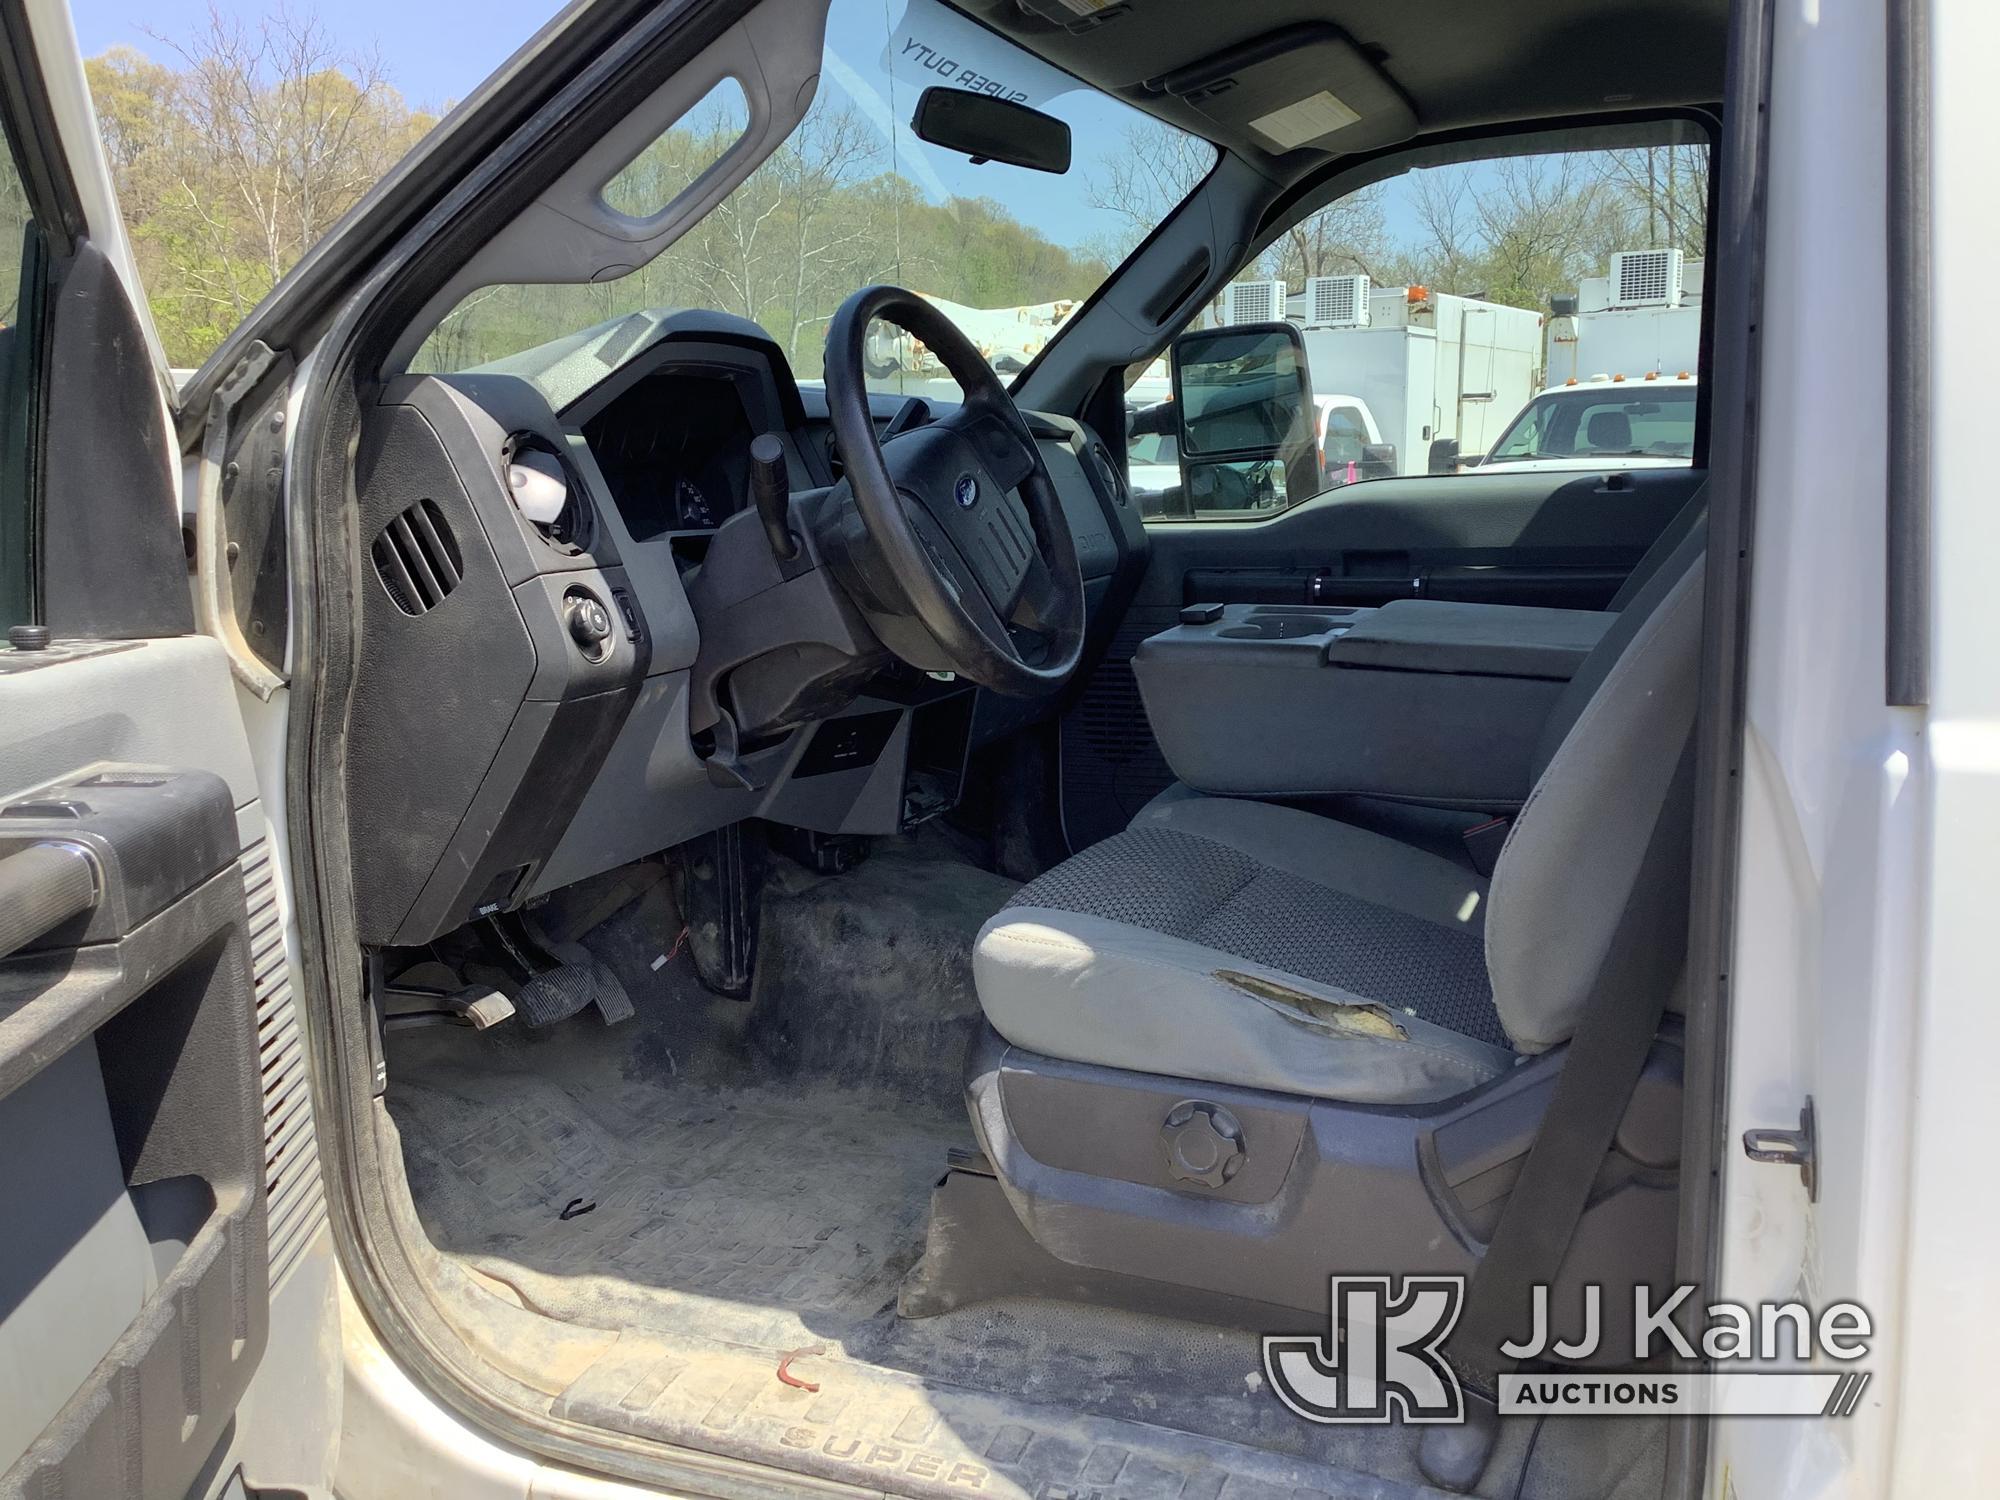 (Smock, PA) 2014 Ford F350 4x4 Pickup Truck Runs & Moves, Check Engine Light On, Rust & Body Damage